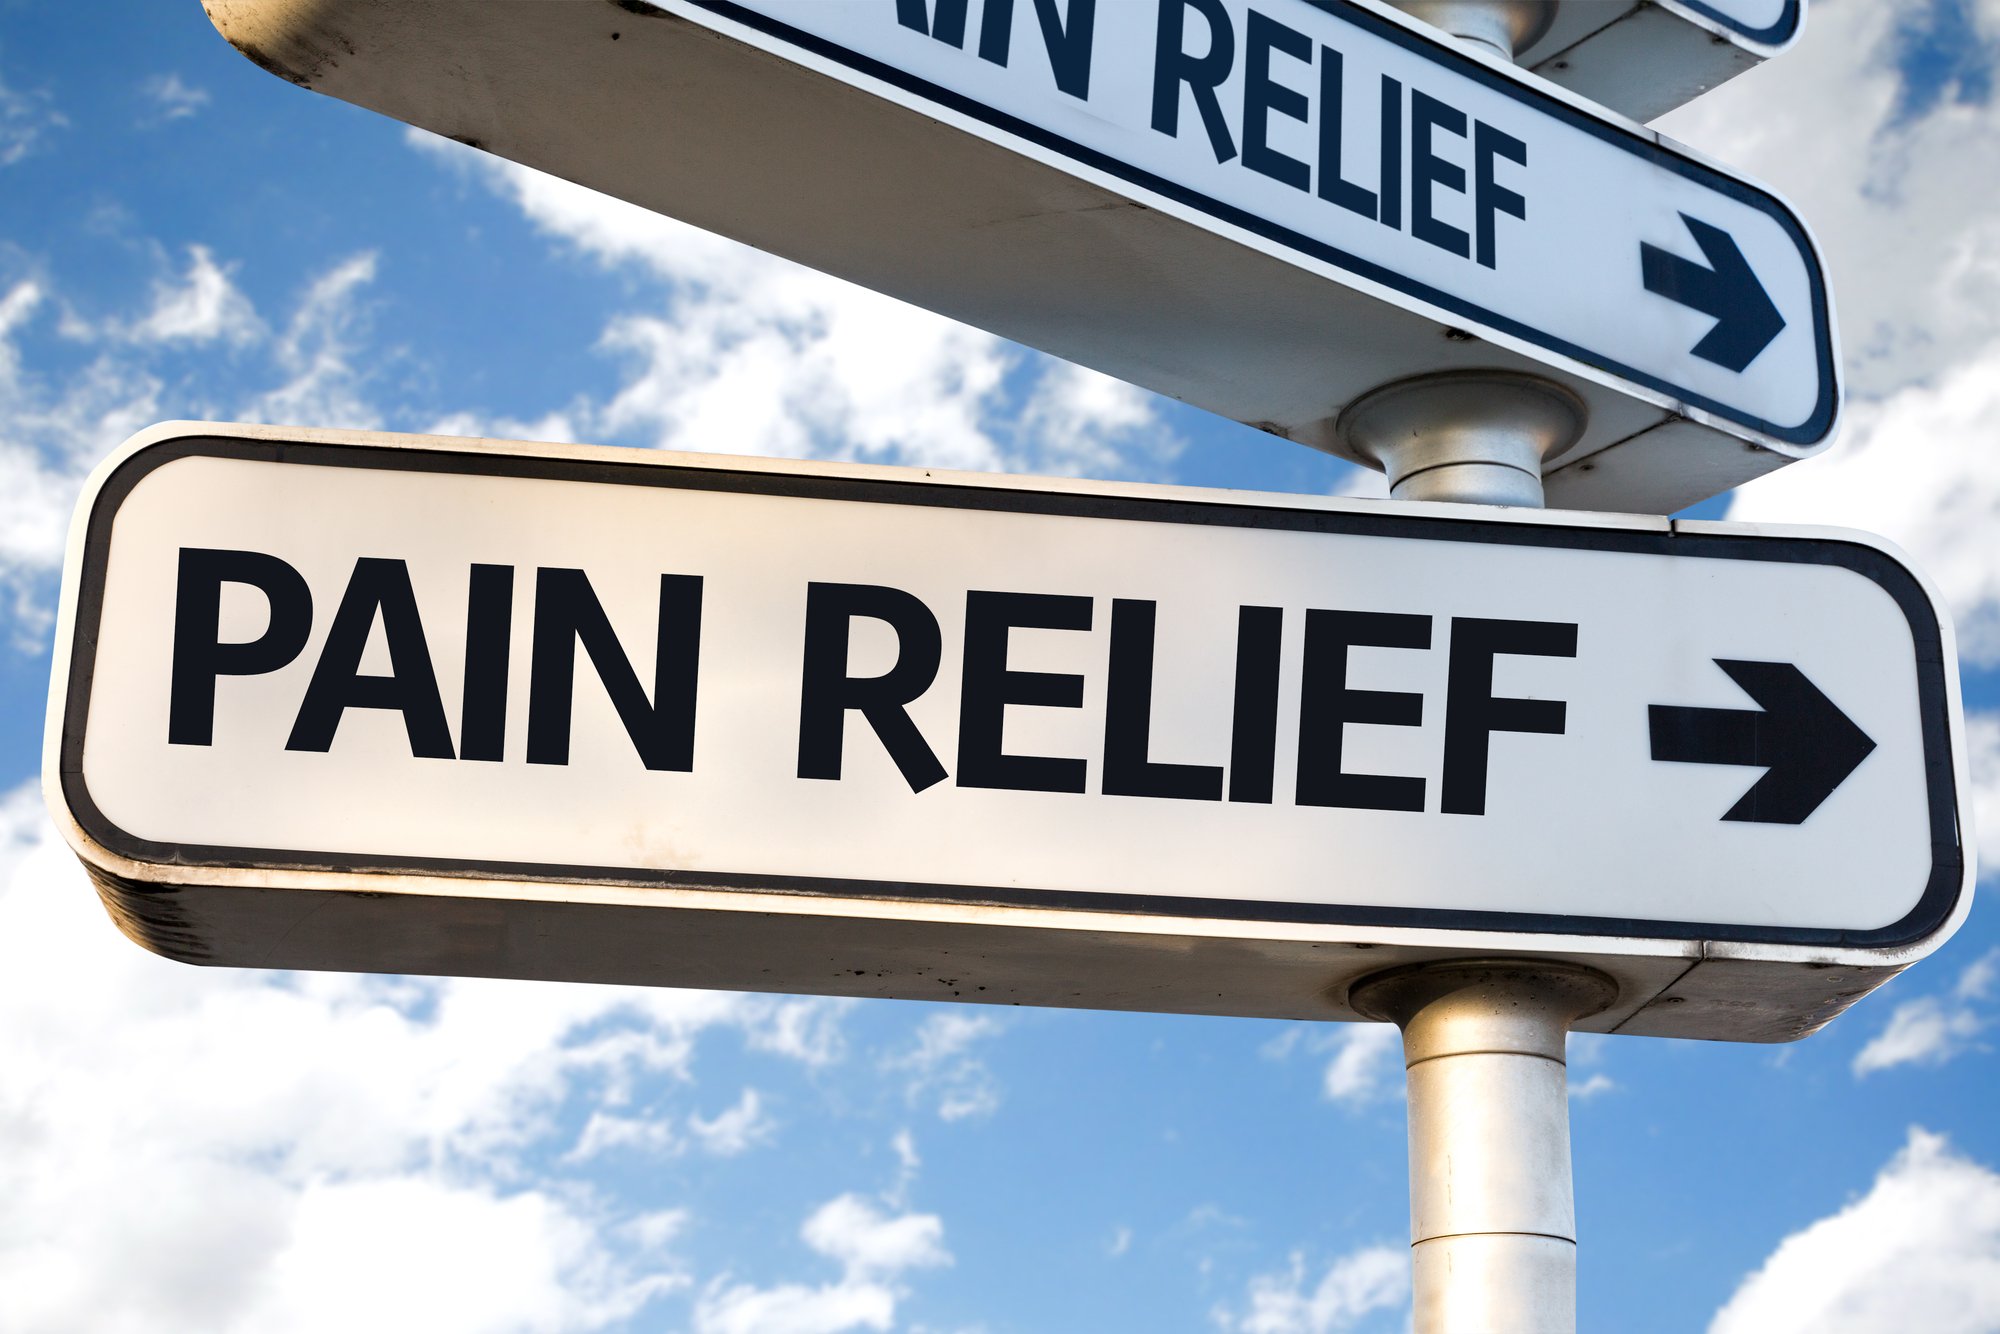 Pain Relief direction sign